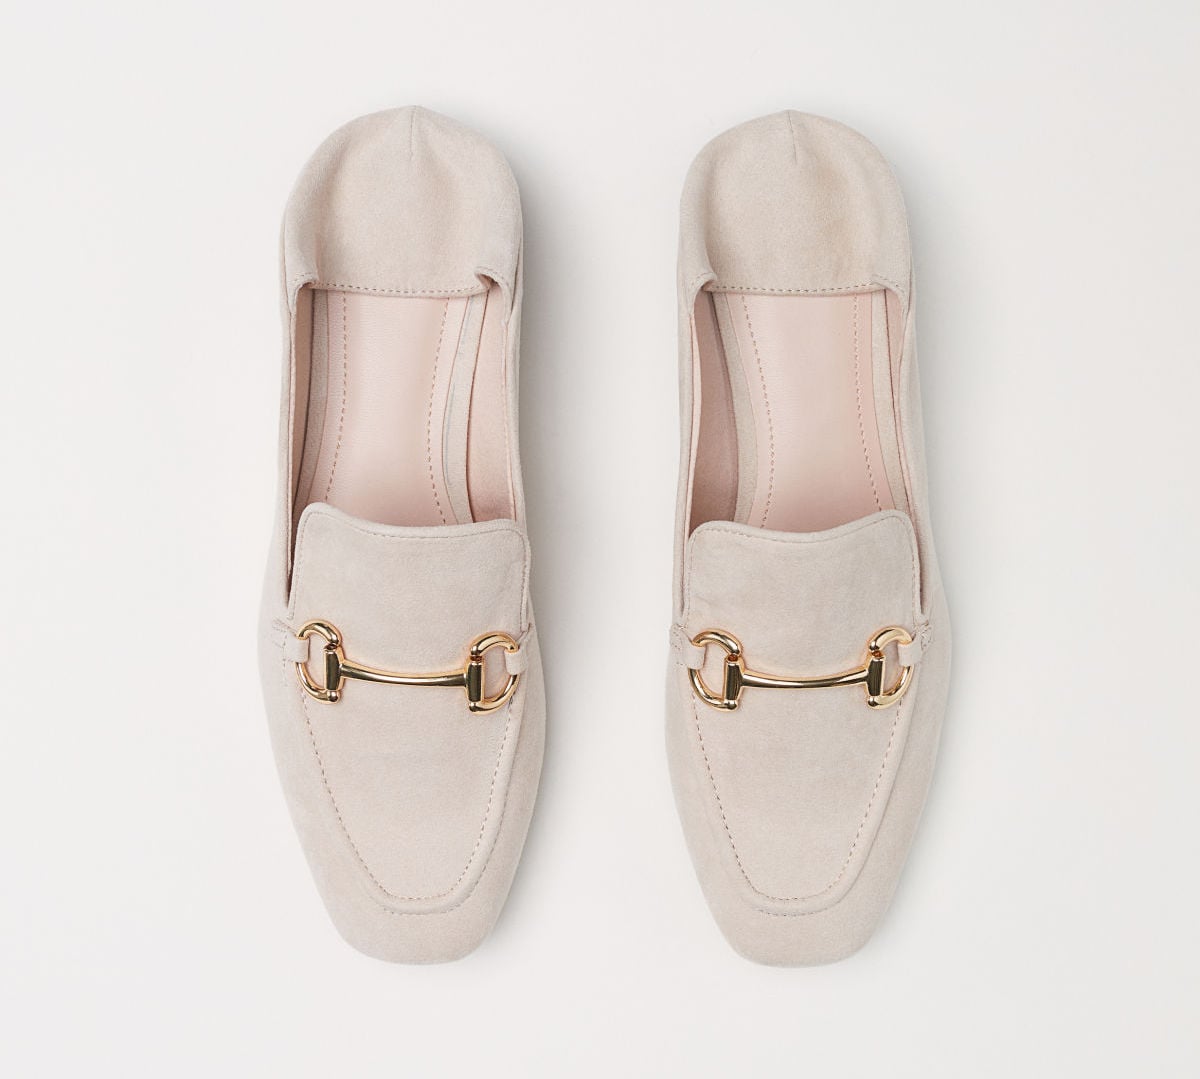 H\u0026M Slip-On Loafers | These 10 Cute 